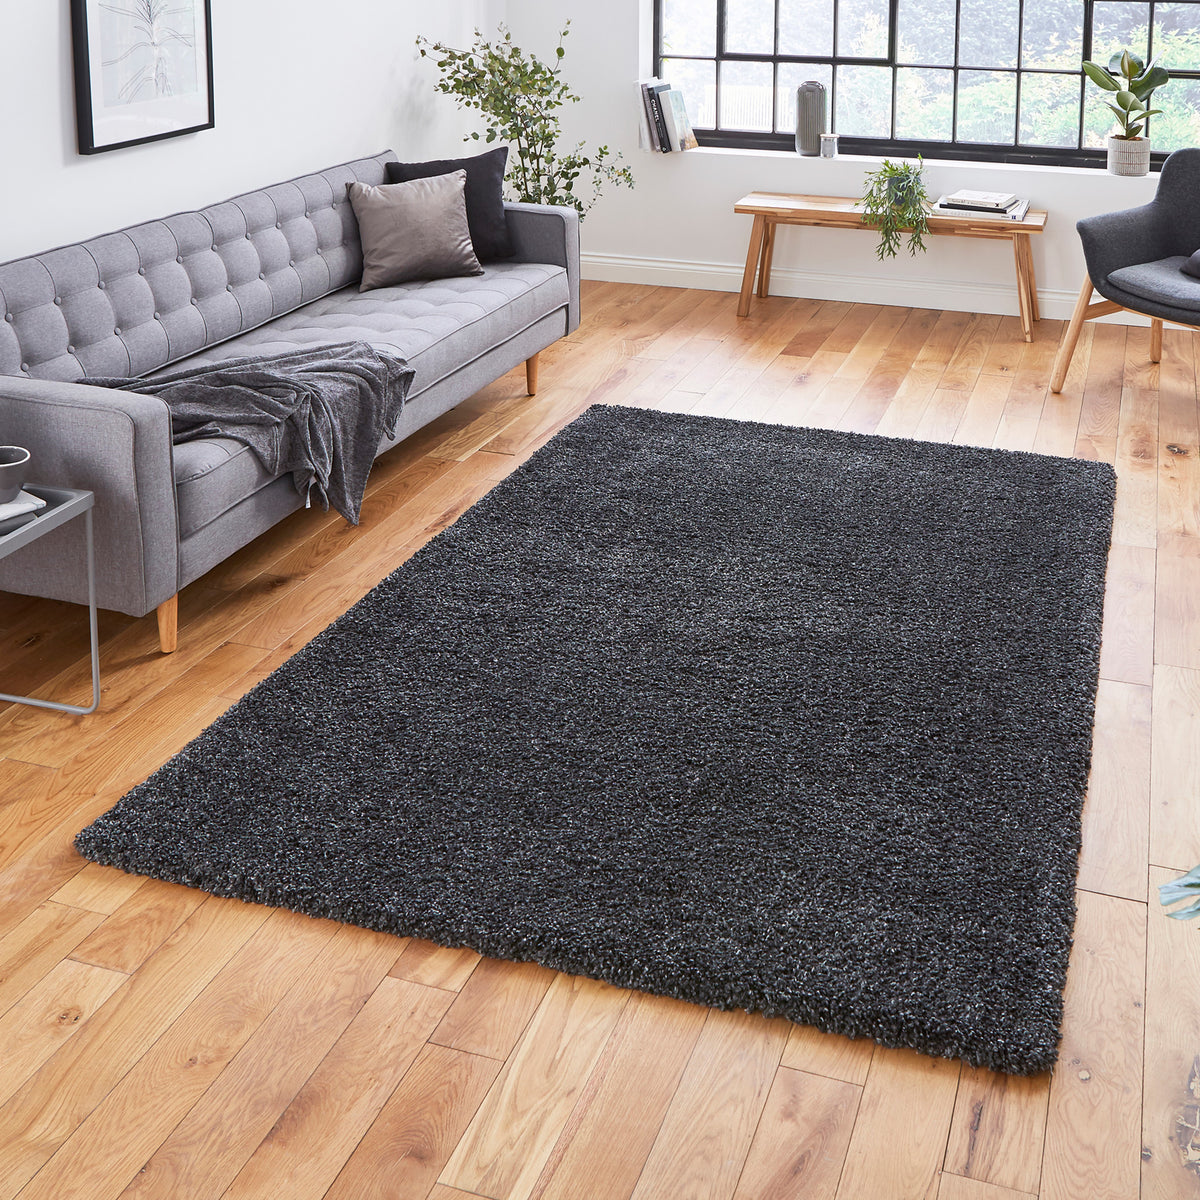 Roswell Dark Grey Stain Resistant Shaggy Rug for living room